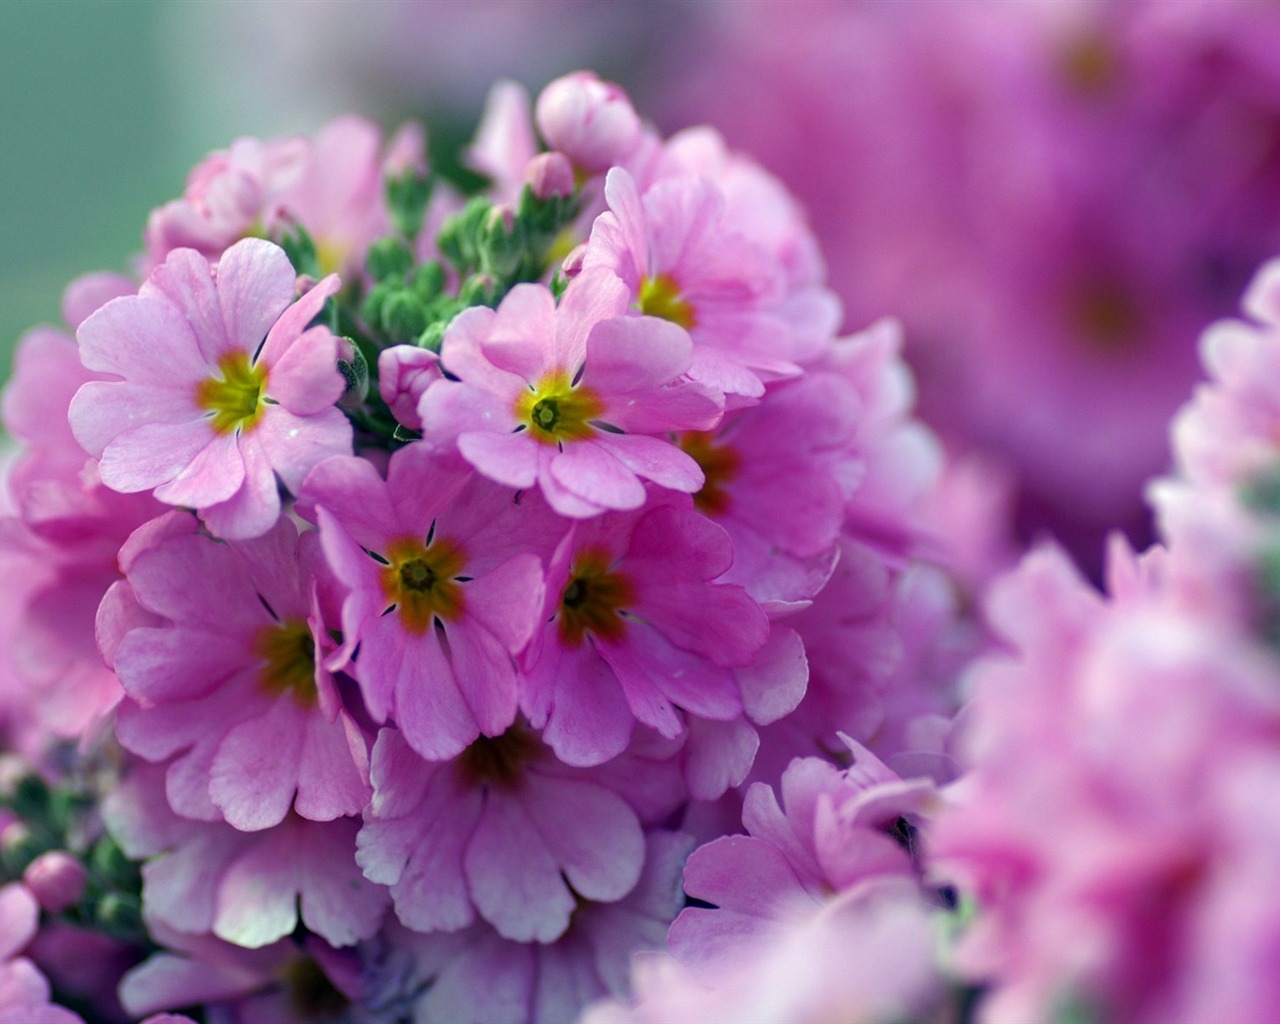 Personal Flowers HD Wallpapers #21 - 1280x1024